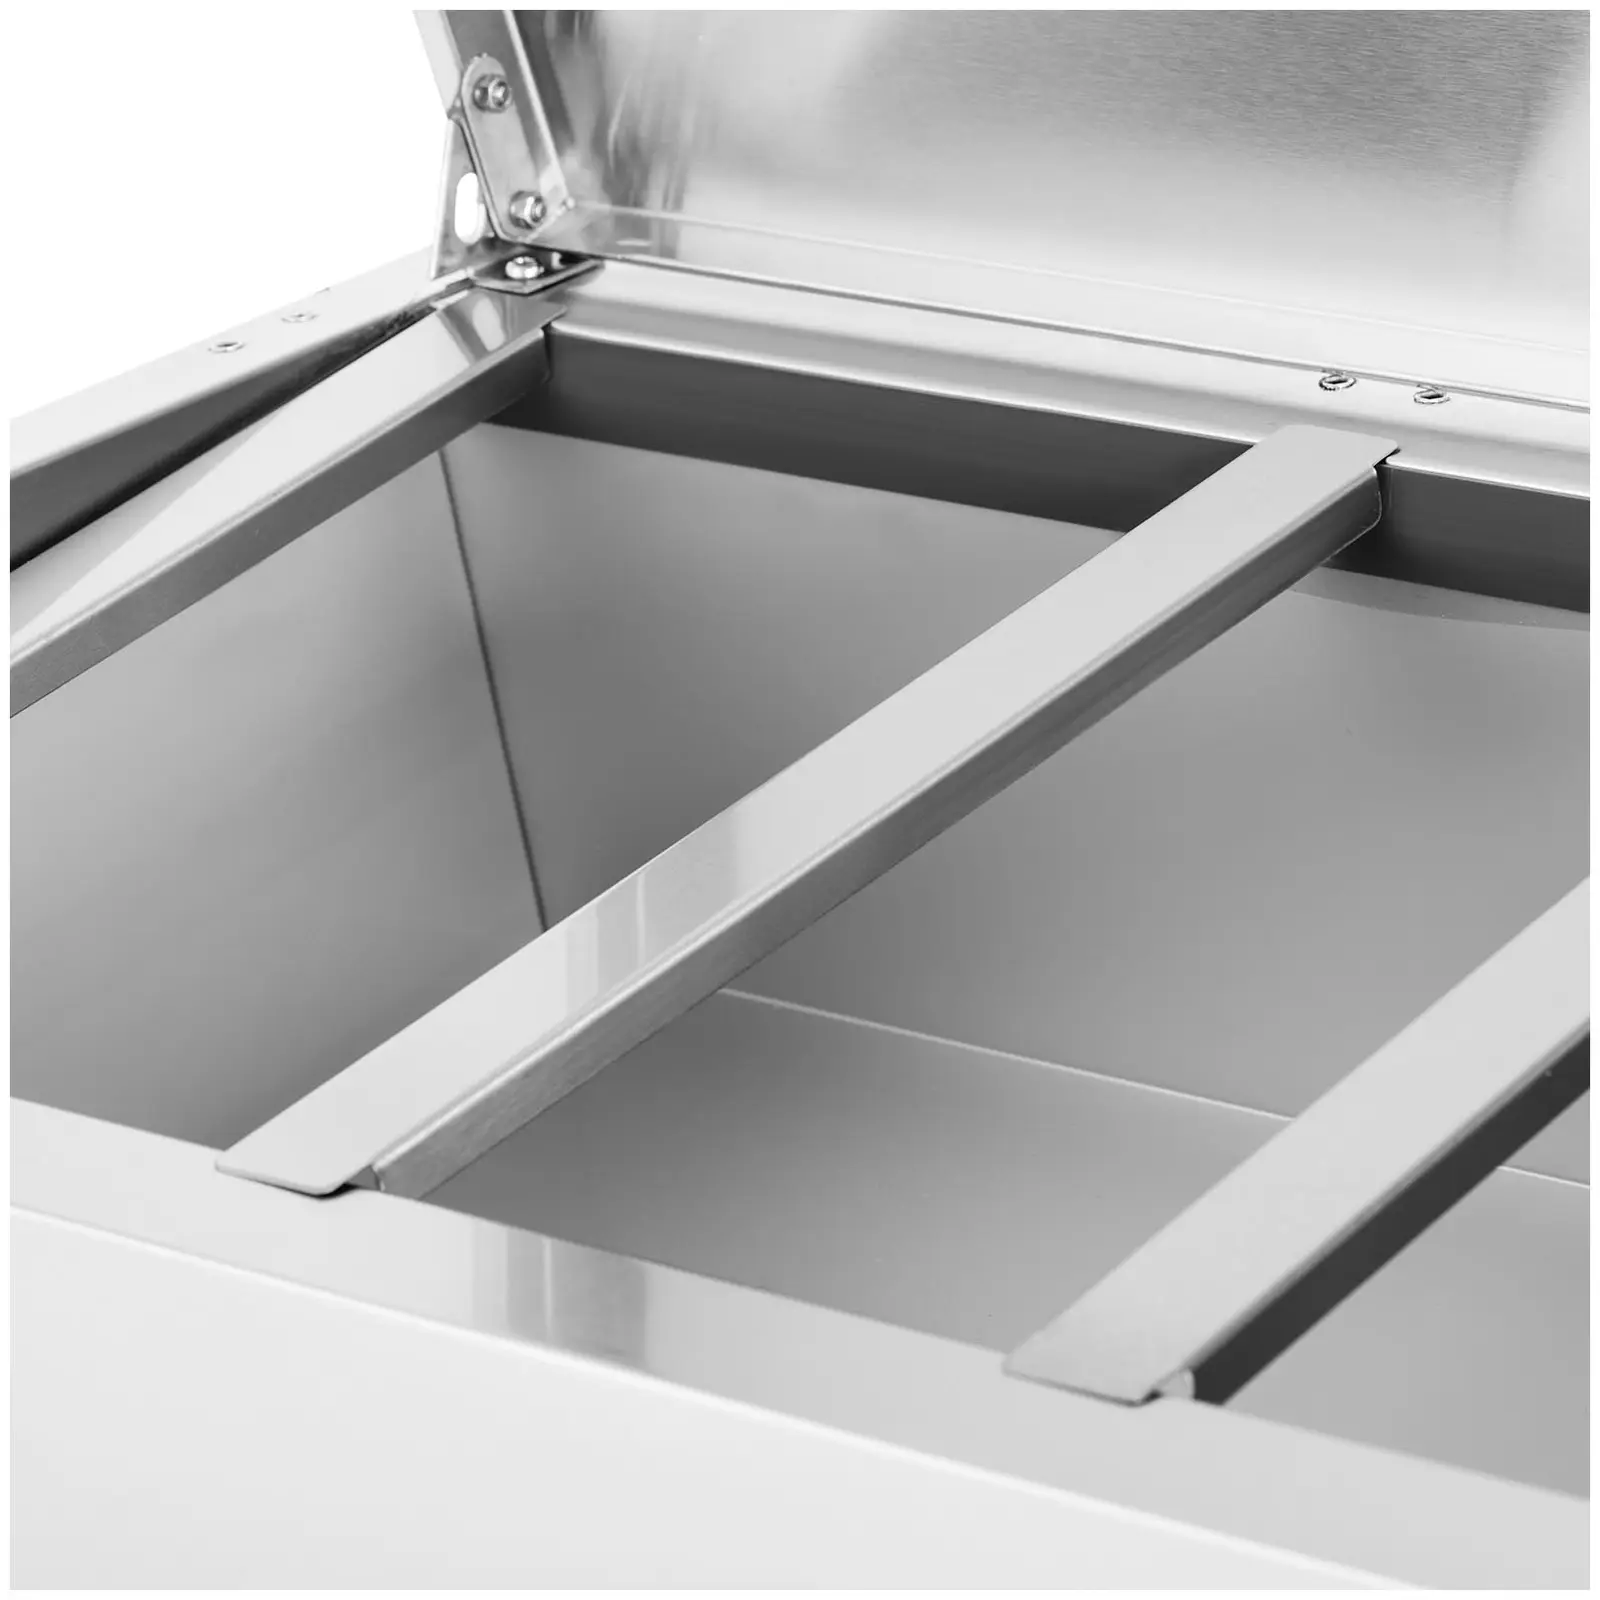 Countertop Refrigerated Display Case - 150 x 39 cm - 6 GN 1/3 Containers